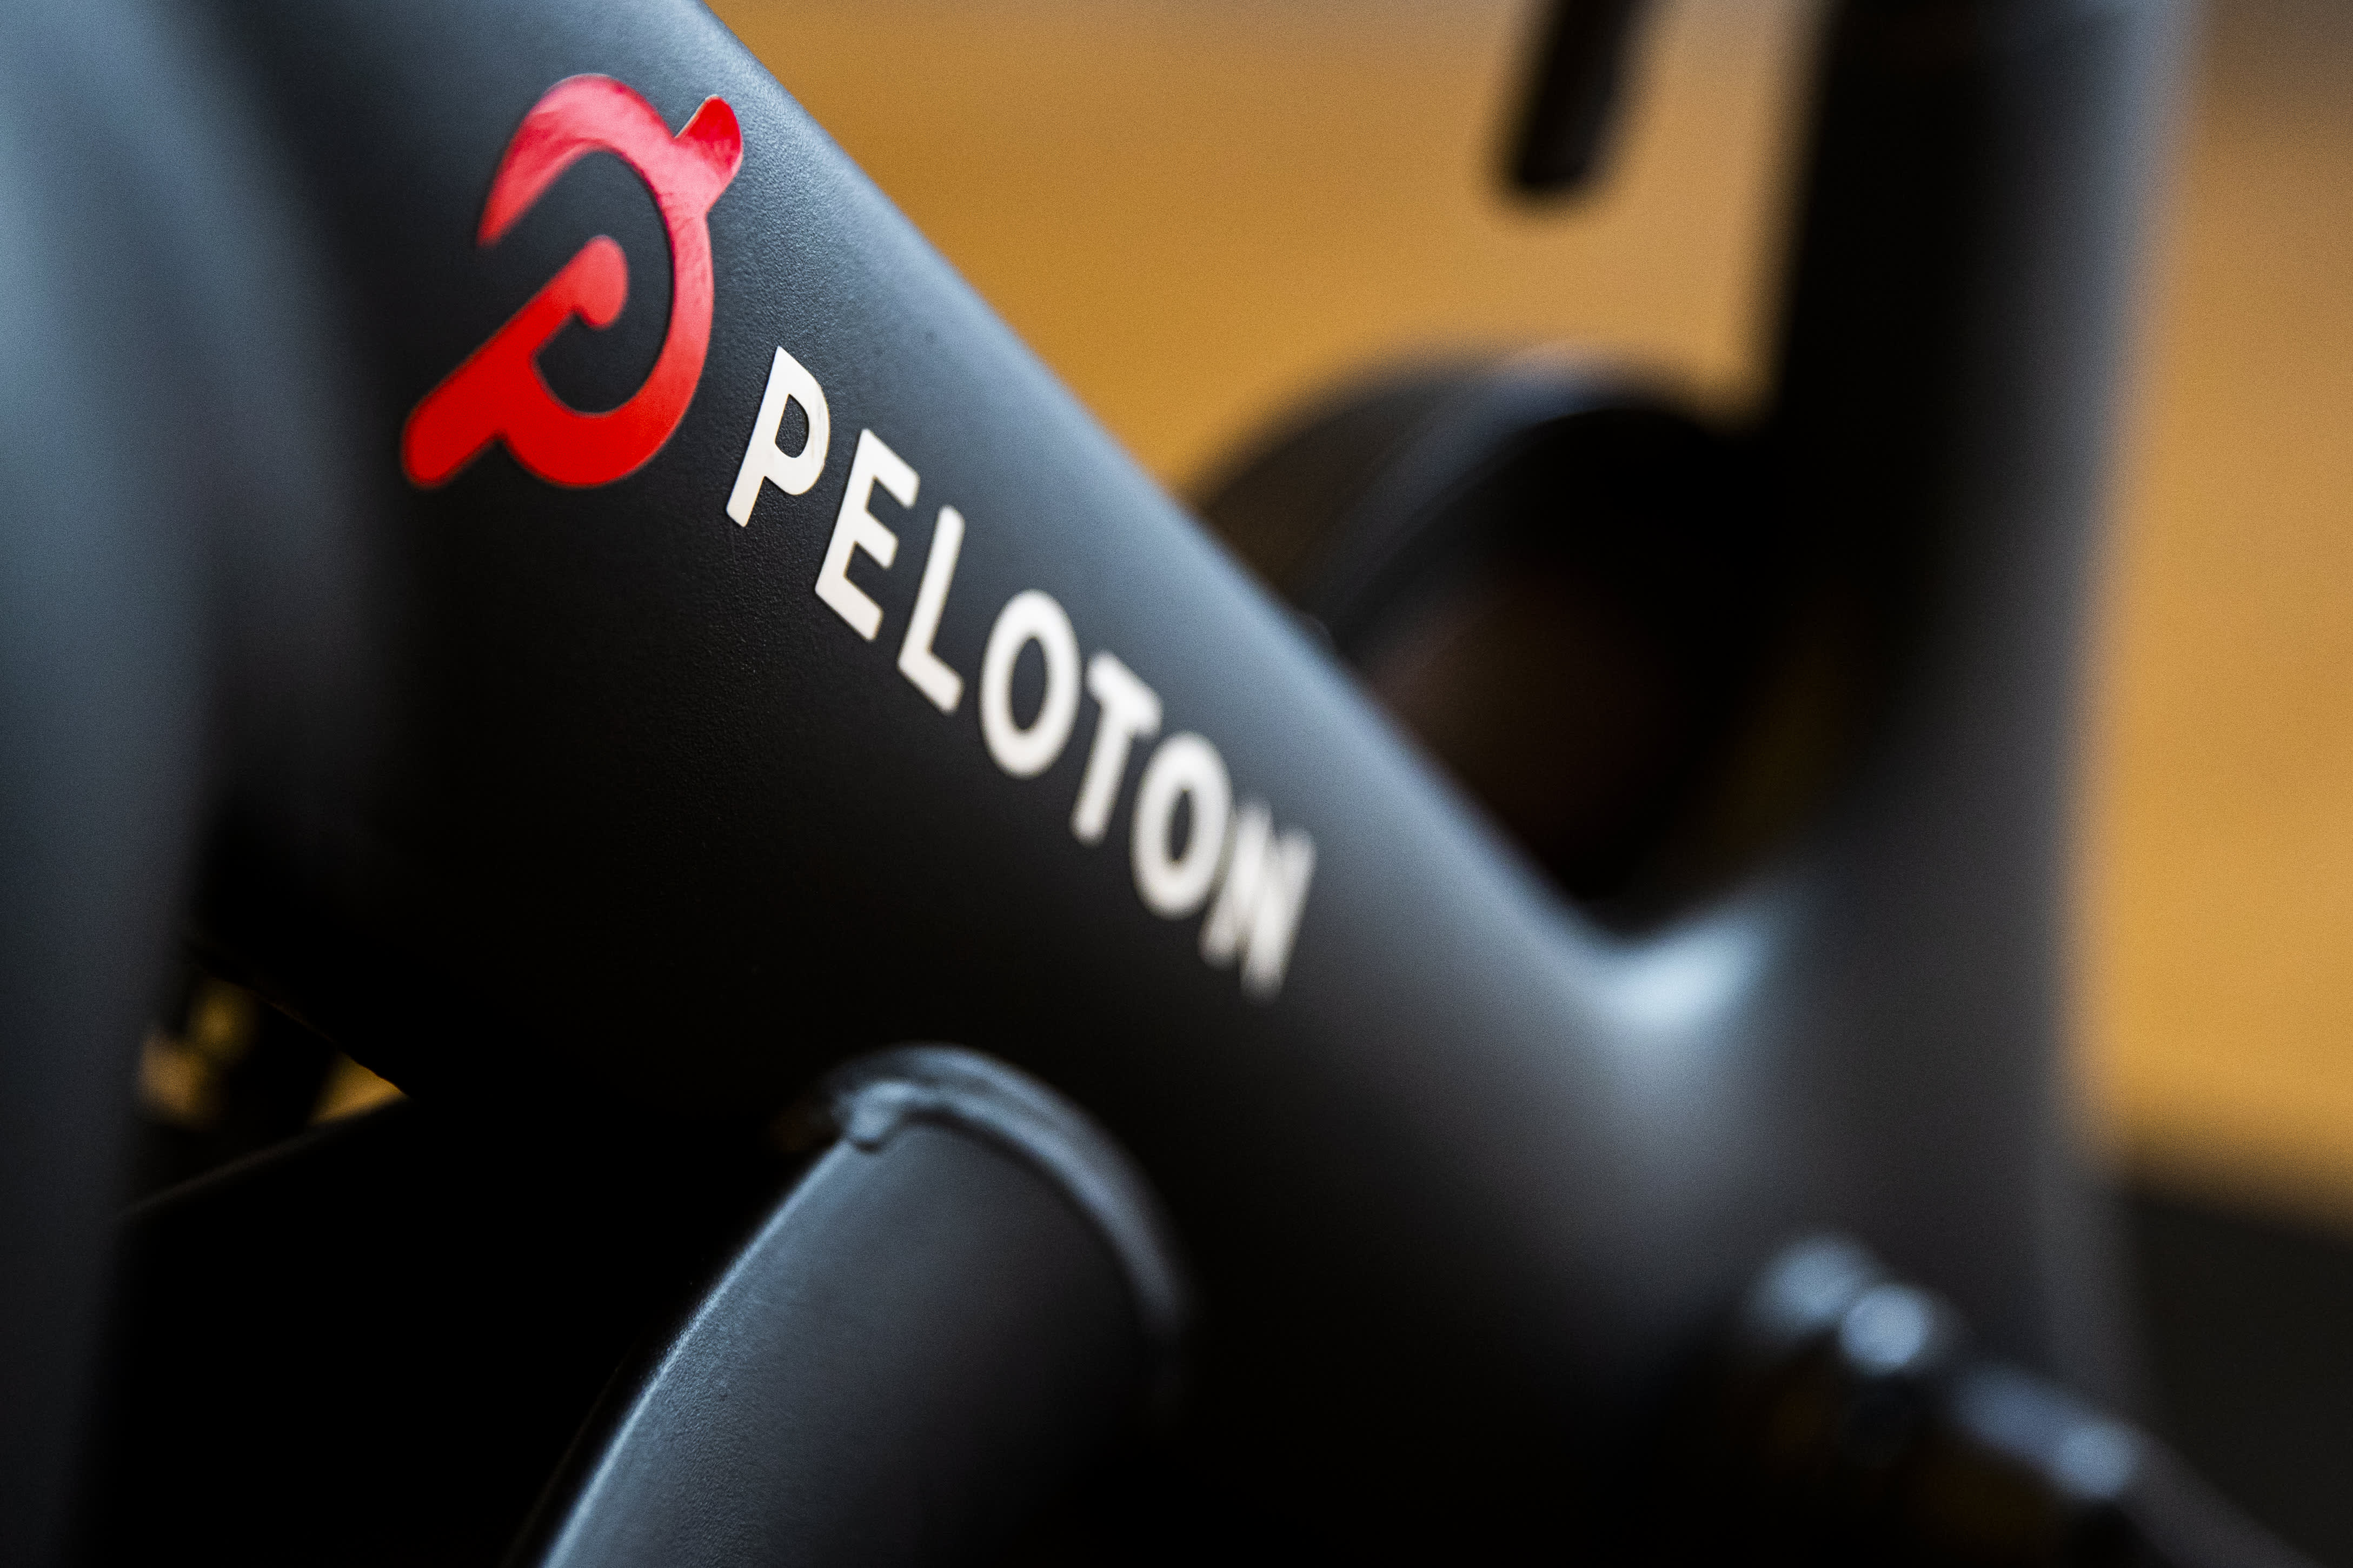 Peloton’s holiday may have been weaker than expected, analysts say, prompting lower forecasts